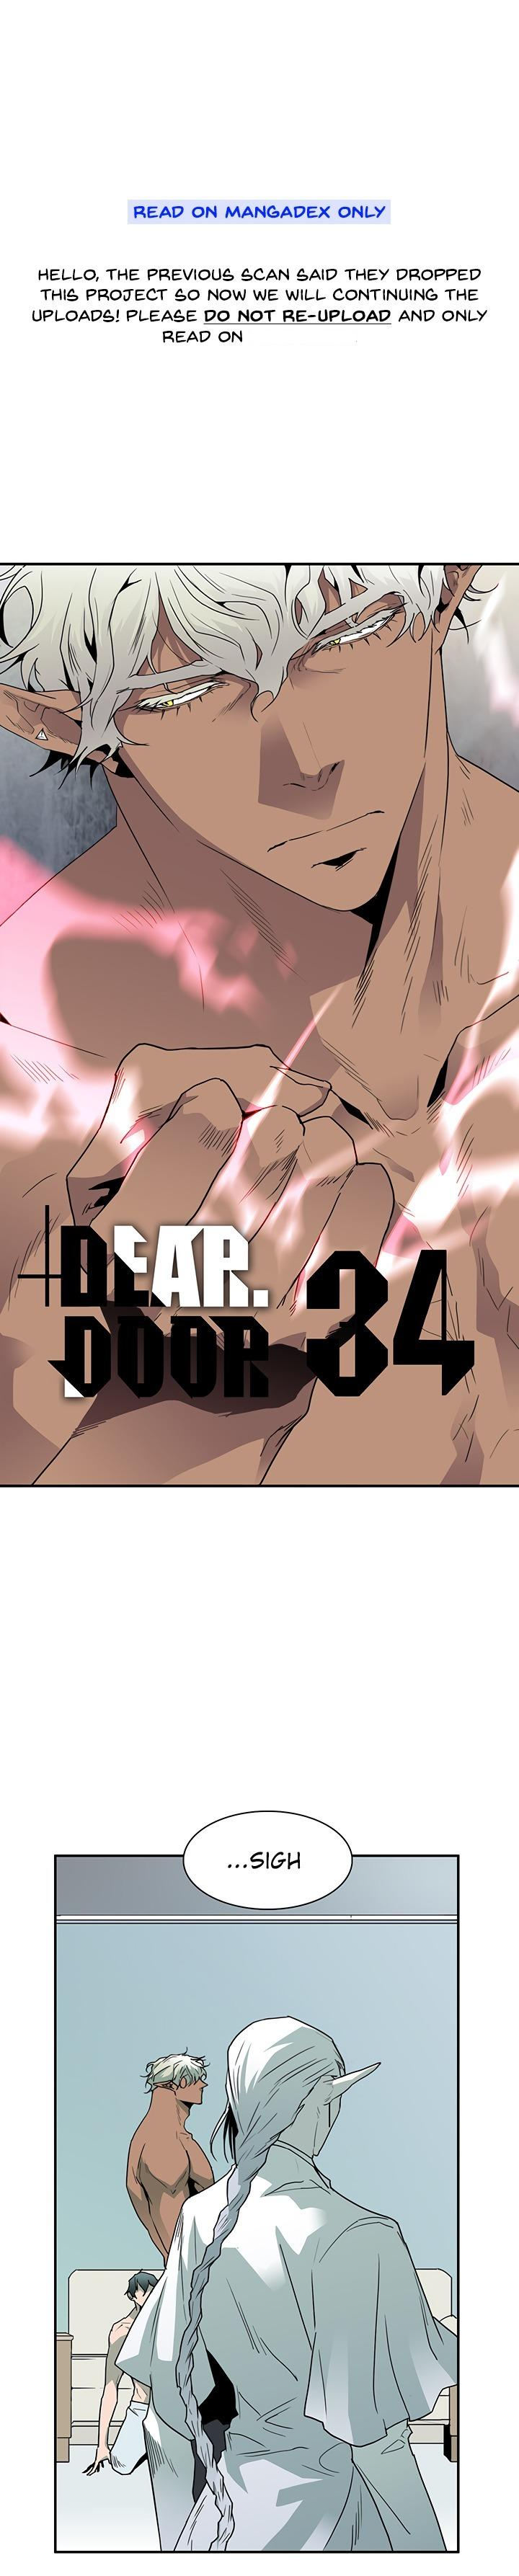 Dear Door - Chapter 34 Page 1